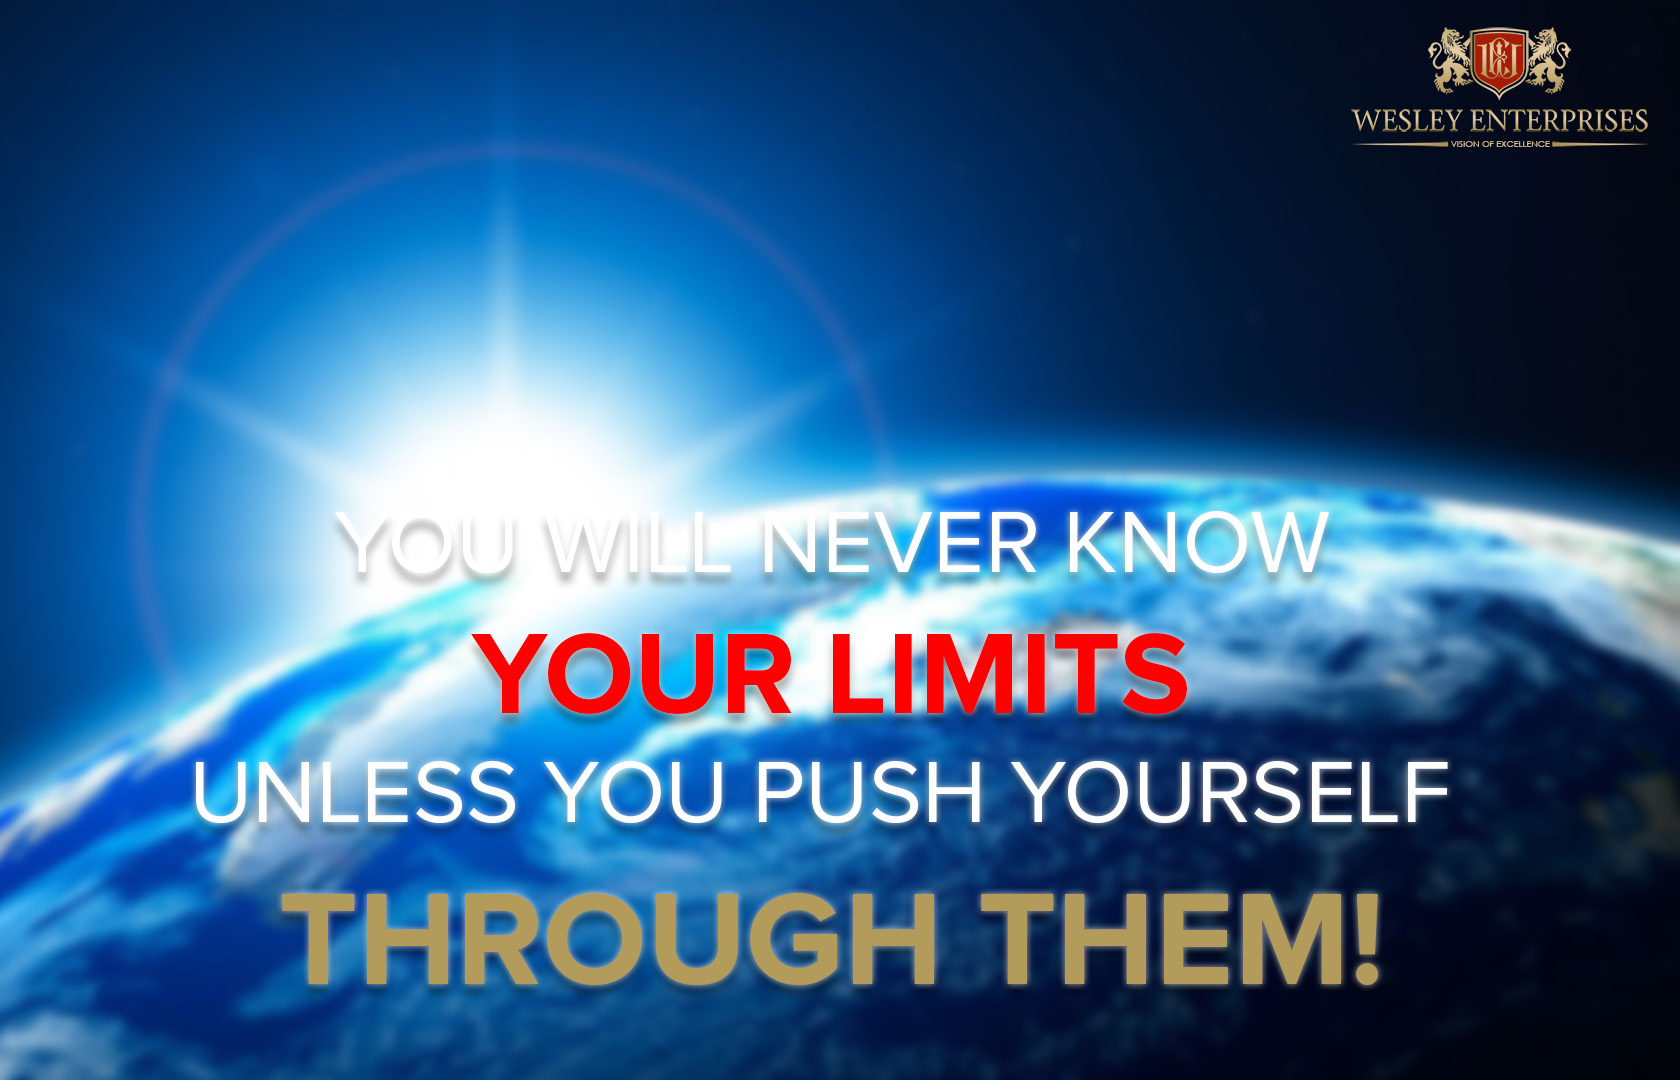 You will never know your limits unless you push through them